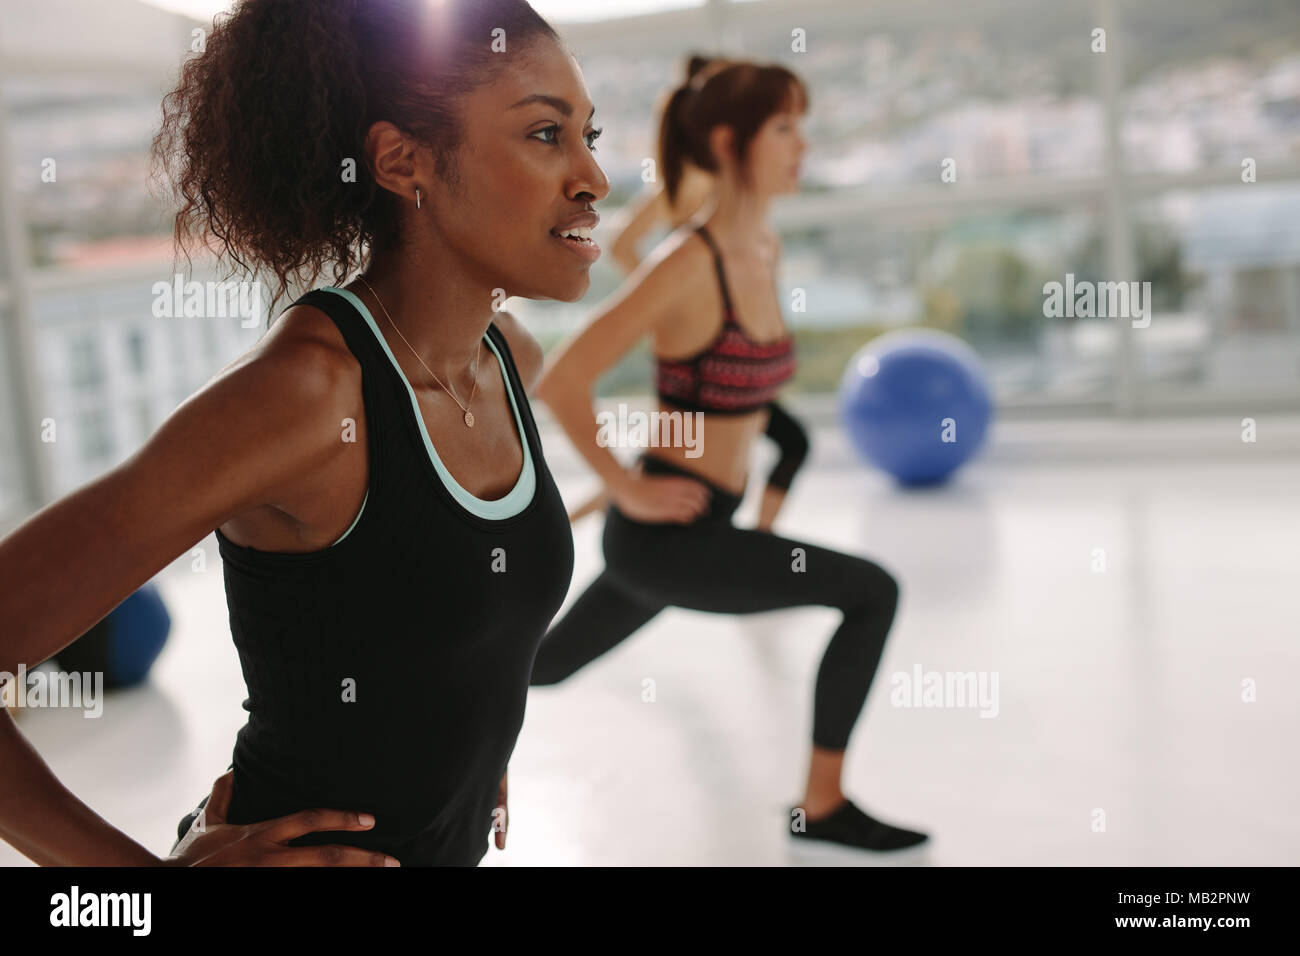 African young woman exercising in gym class. Stretching workout session in health center. Stock Photo